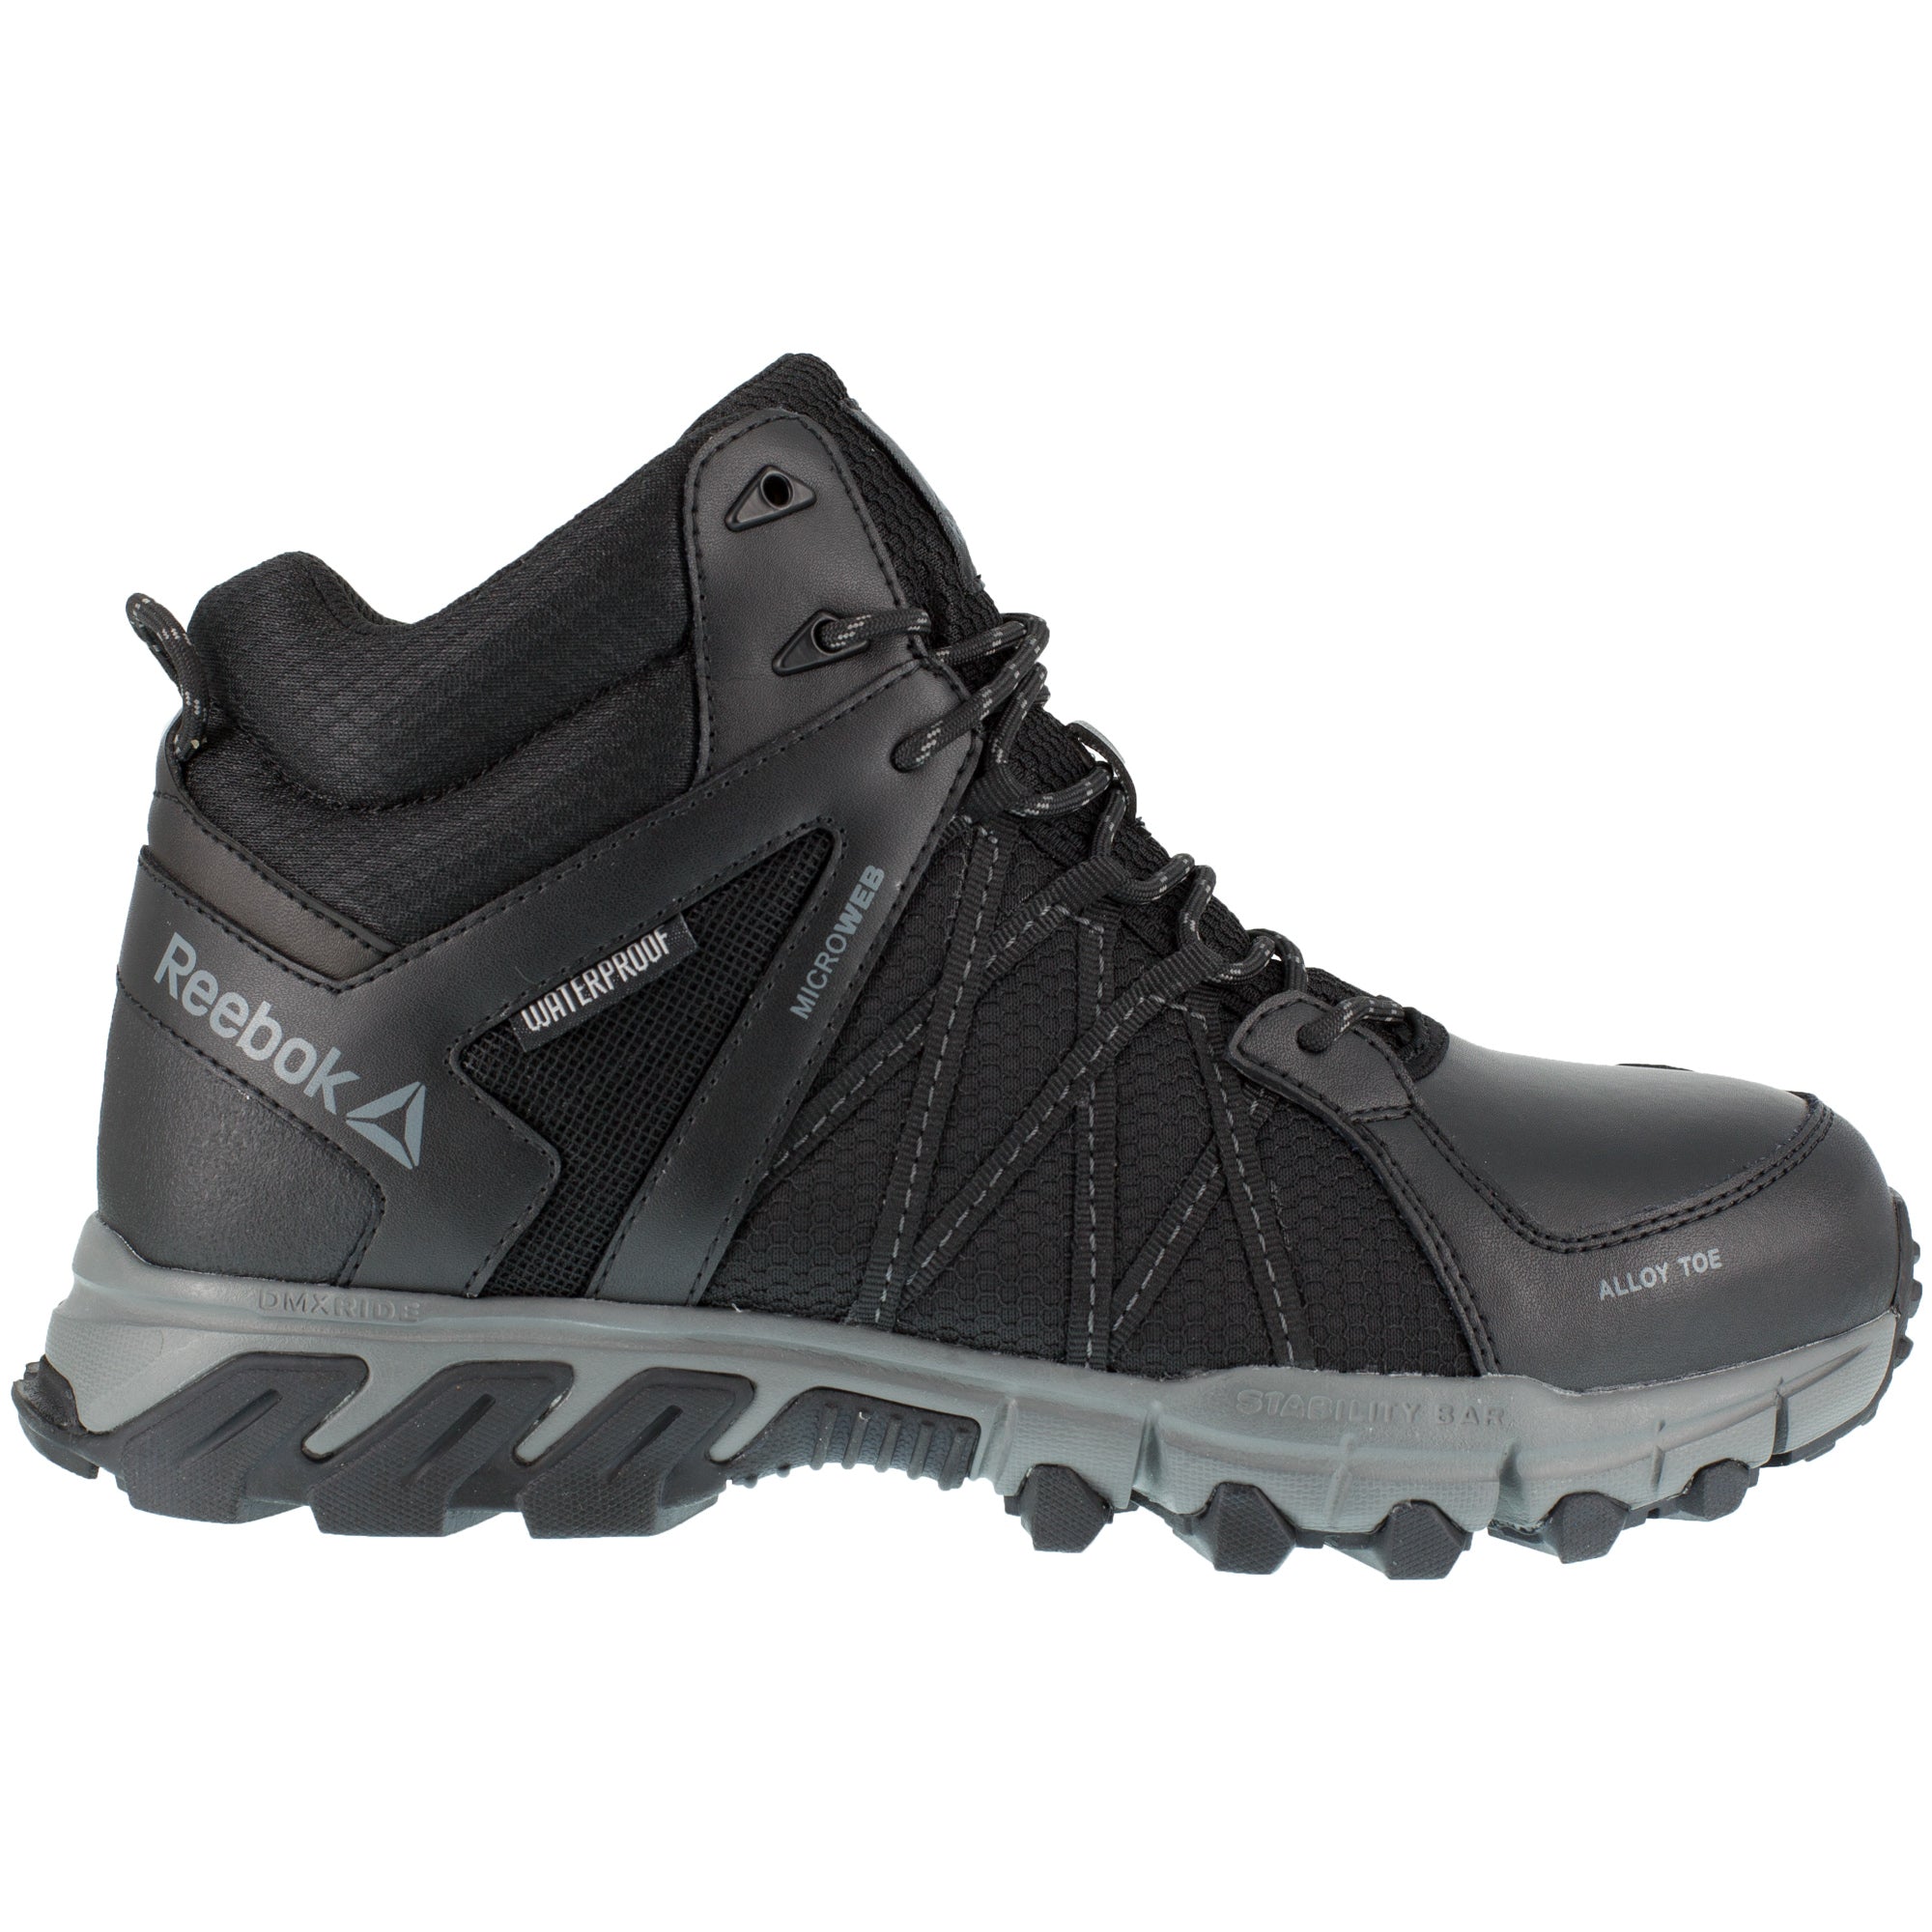 Mens Black/Grey Mesh Work Boots Athletic Mid Cut AT – The Western Company